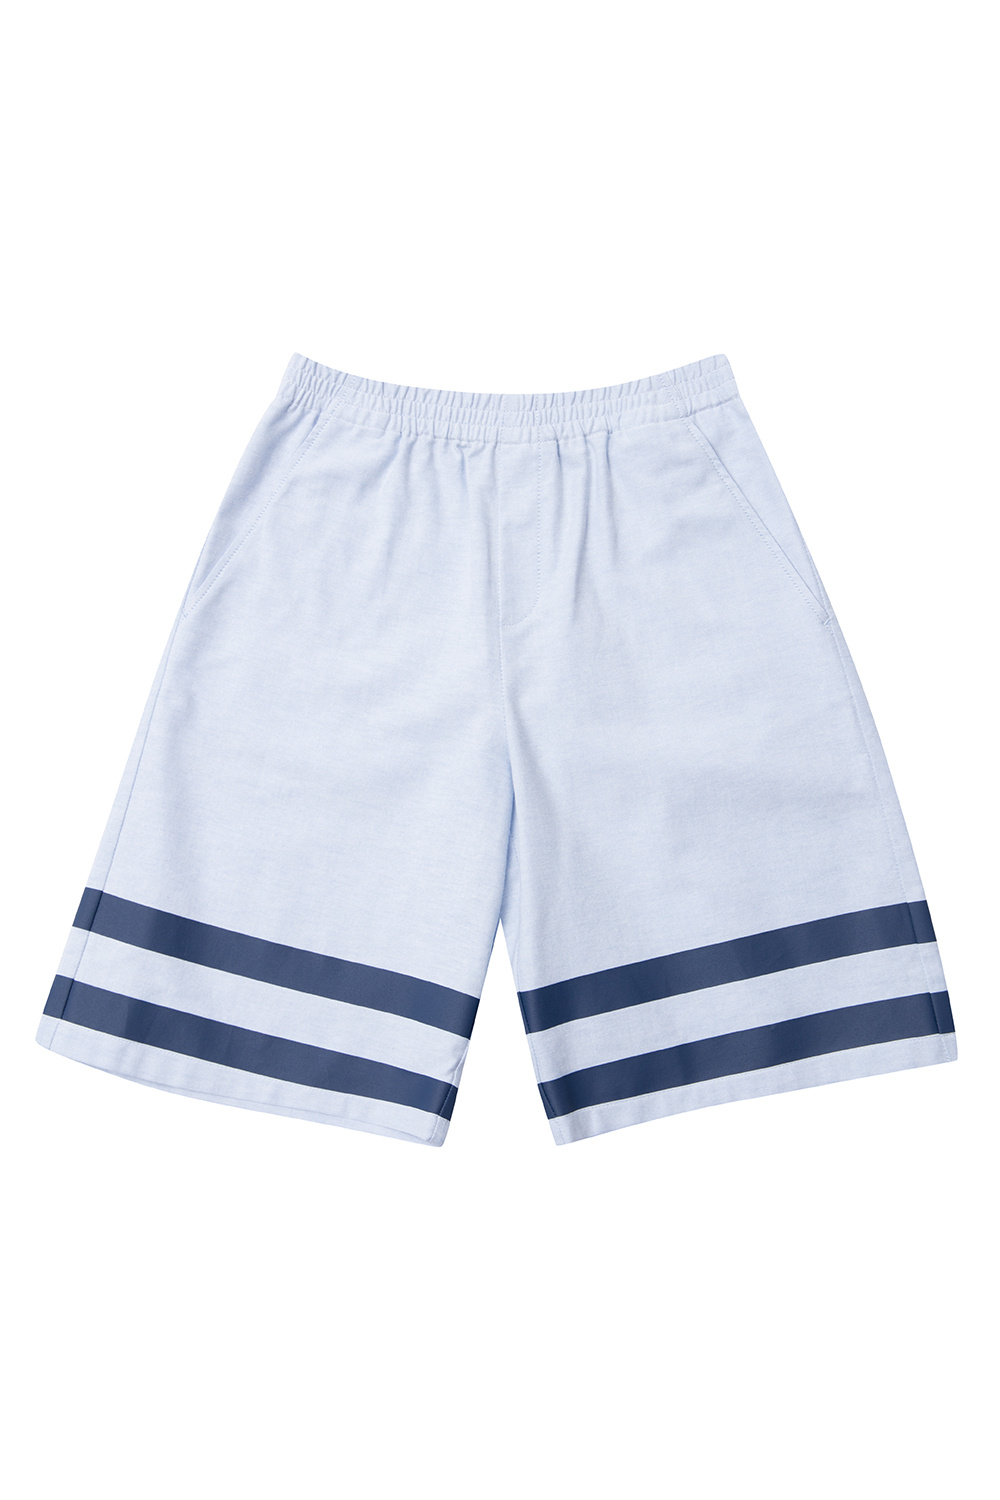 gucci Dionysus Kids Shorts with logo